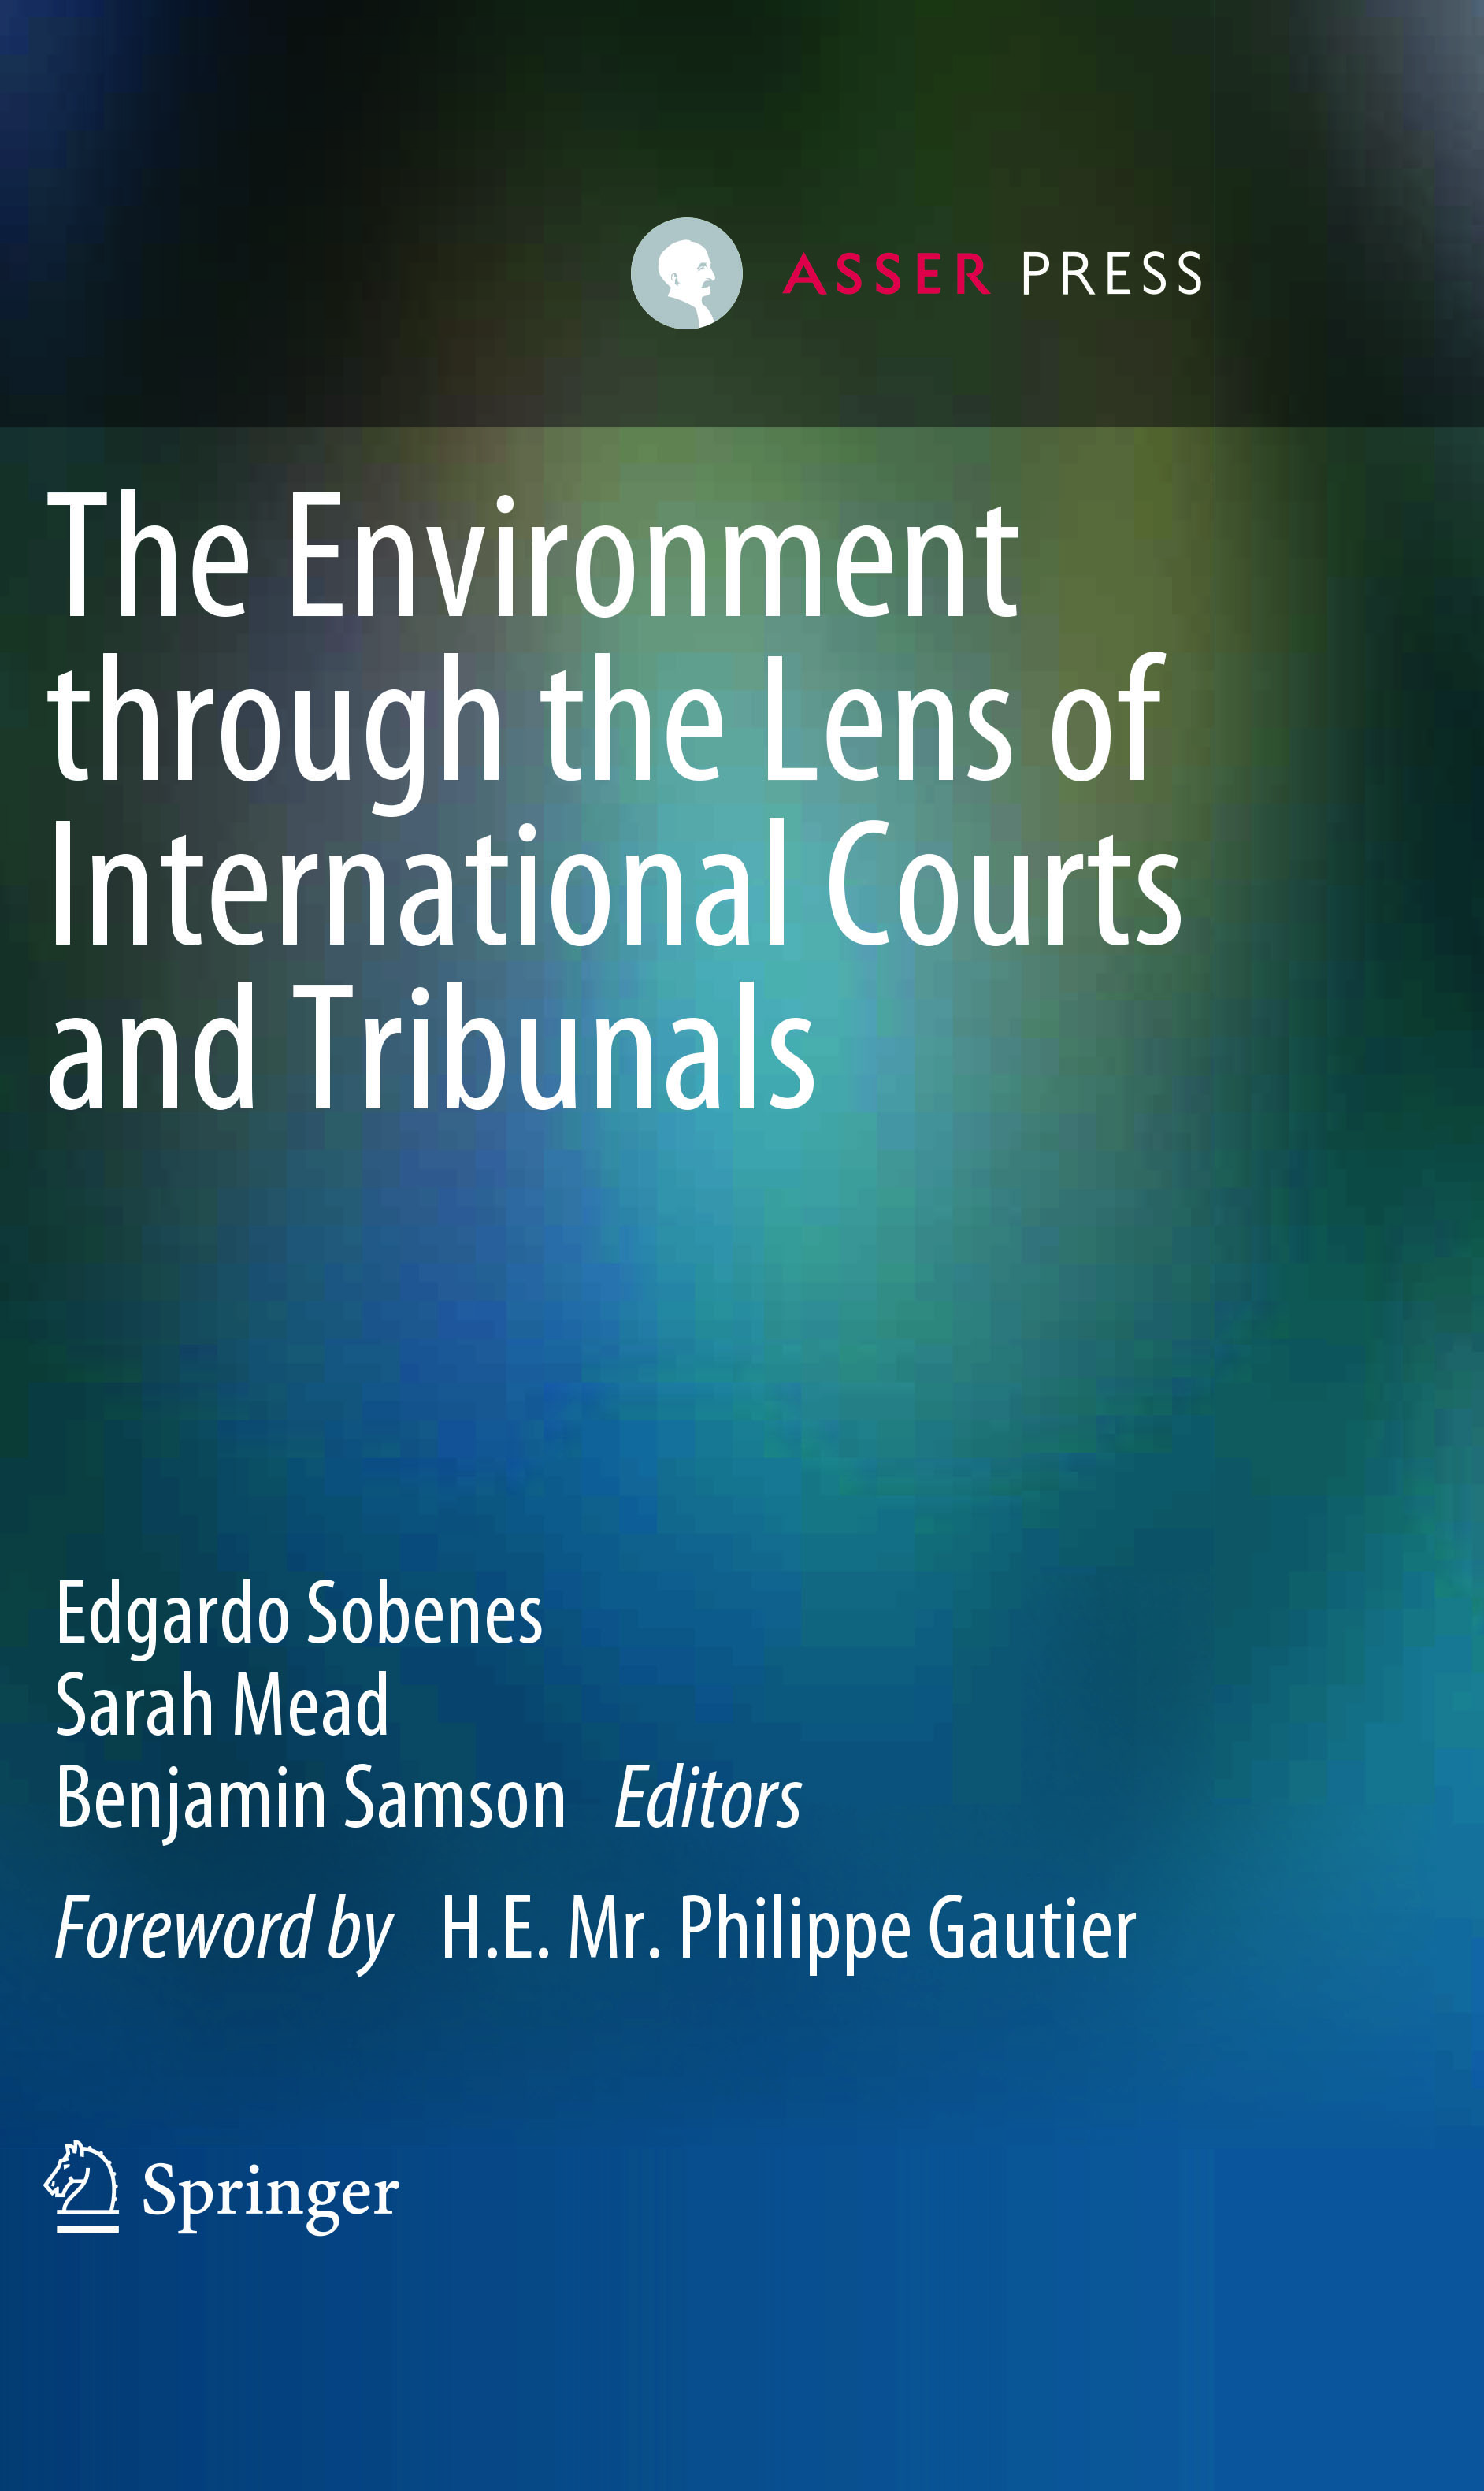 The Environment through the Lens of International Courts and Tribunals